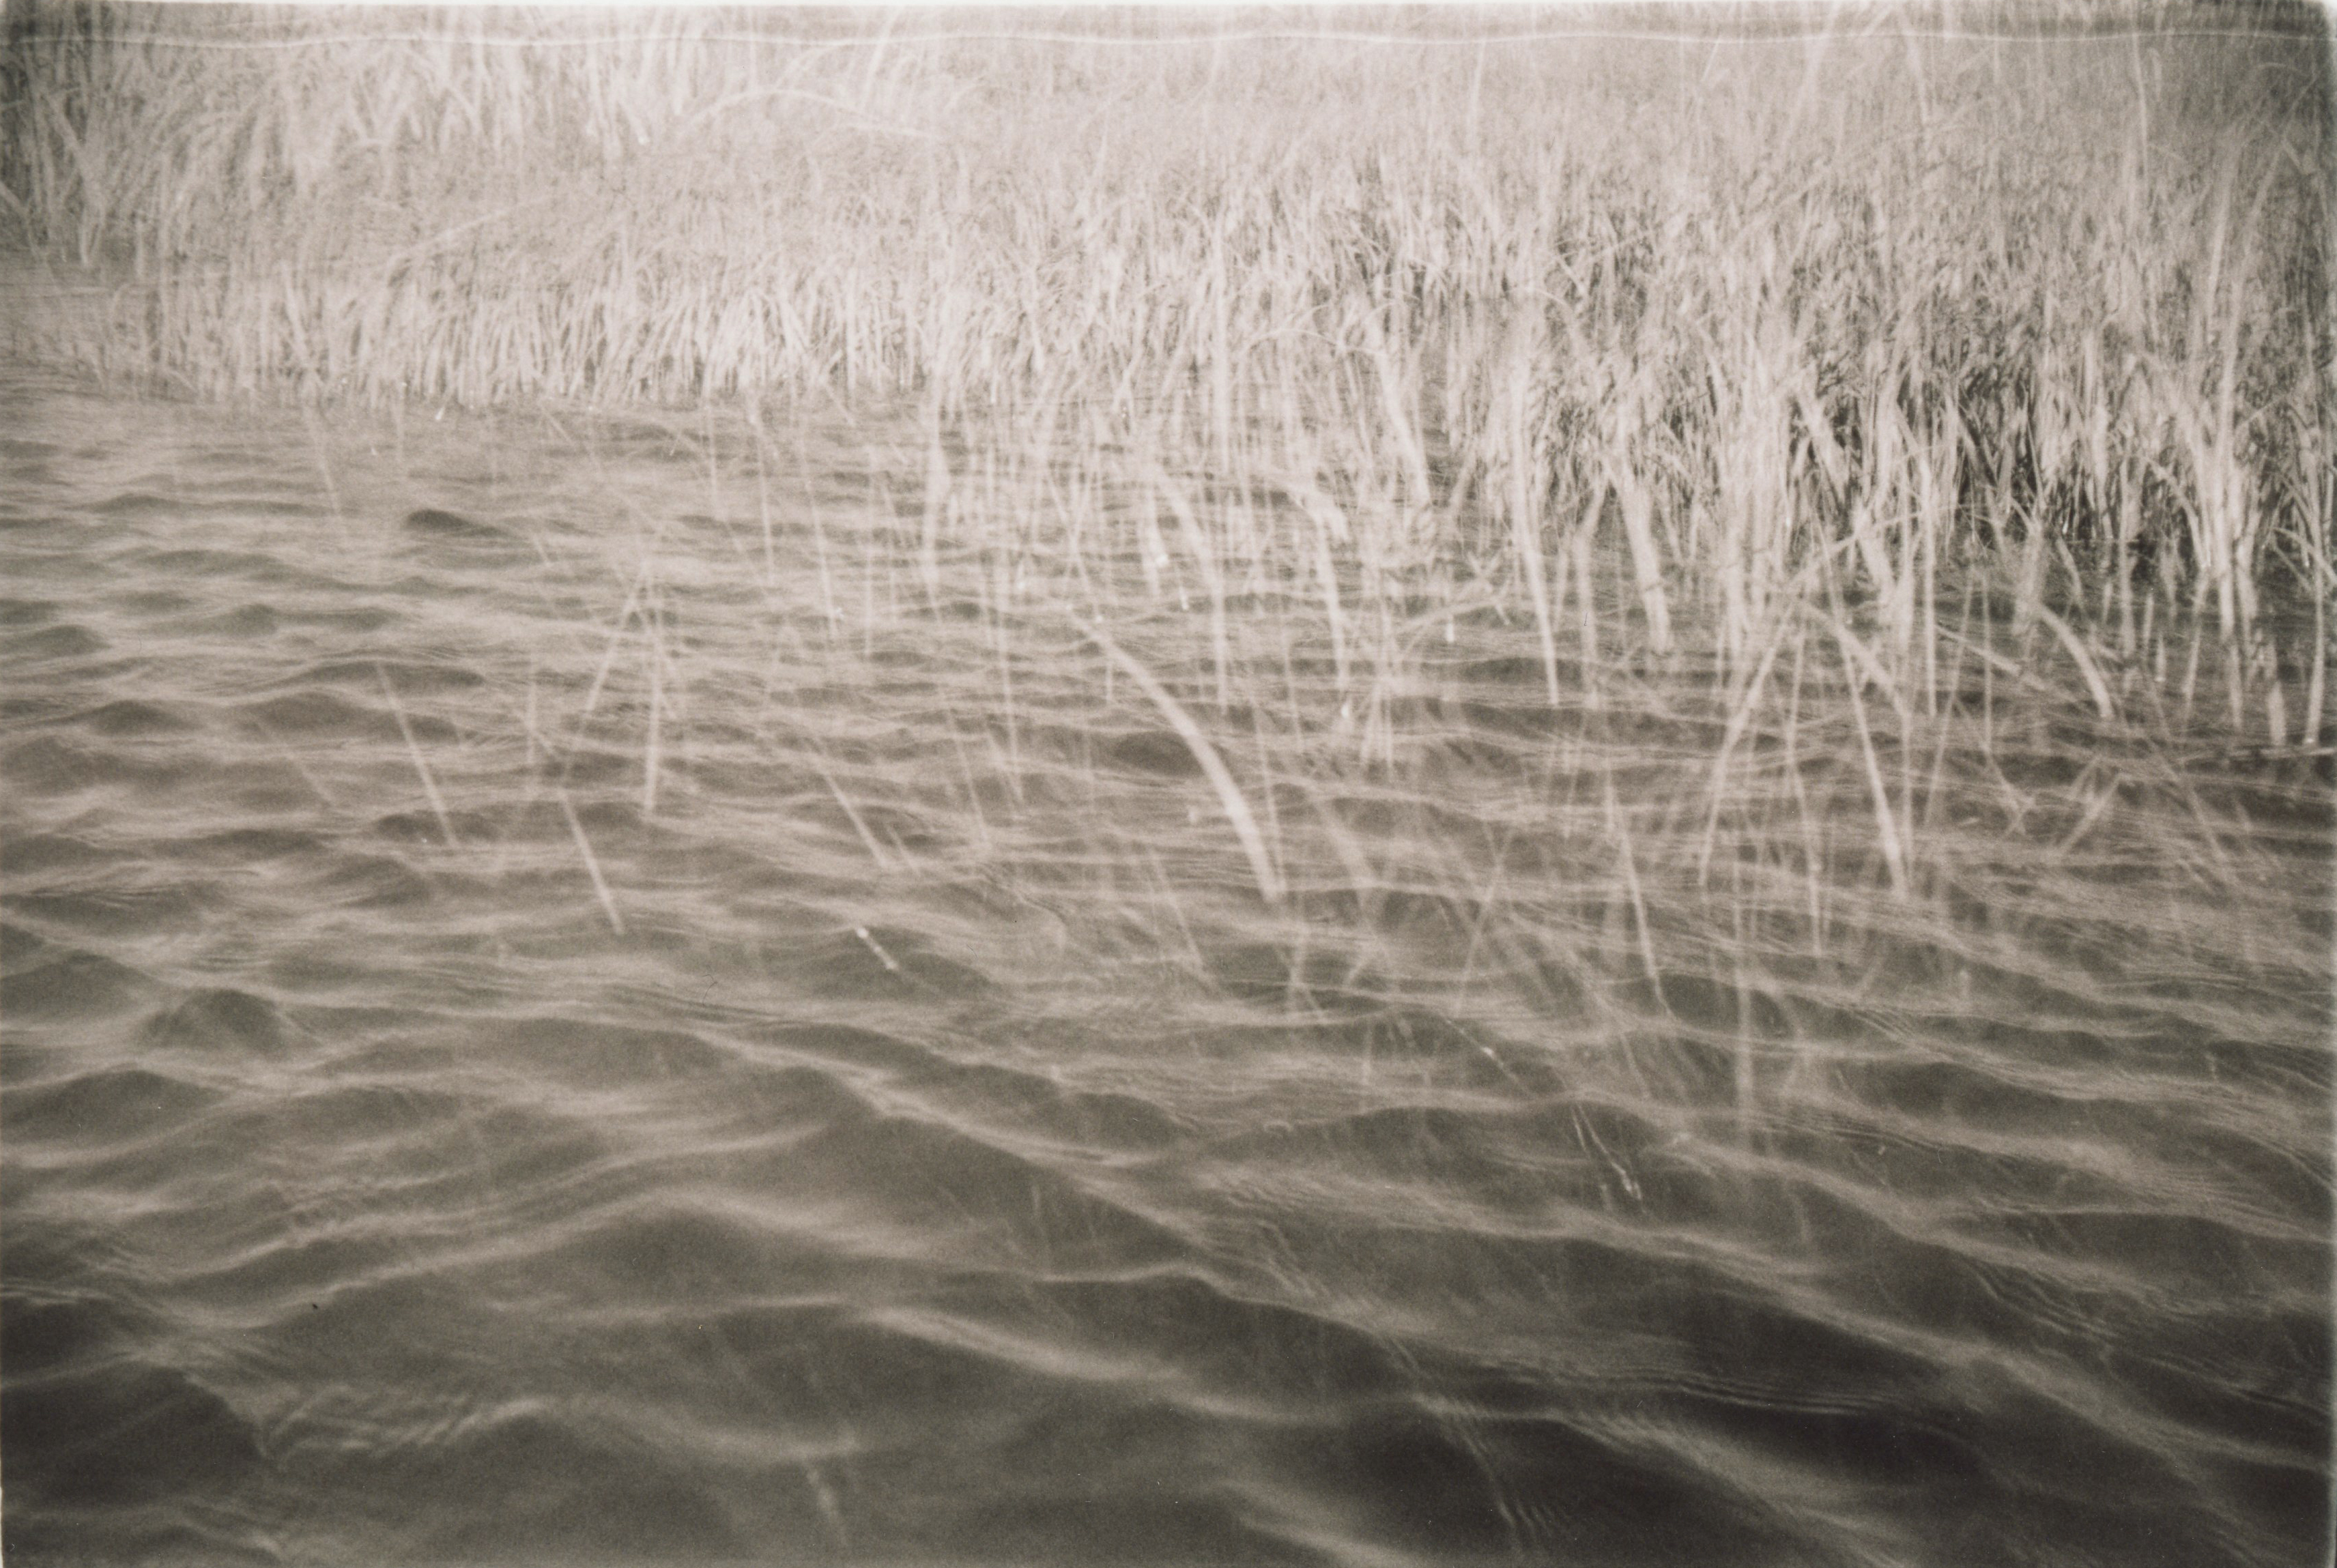 a black and white, sepia toned, 35mm print; slightly wavy water at high tide in the foreground fades into overexposed marsh grass in the background